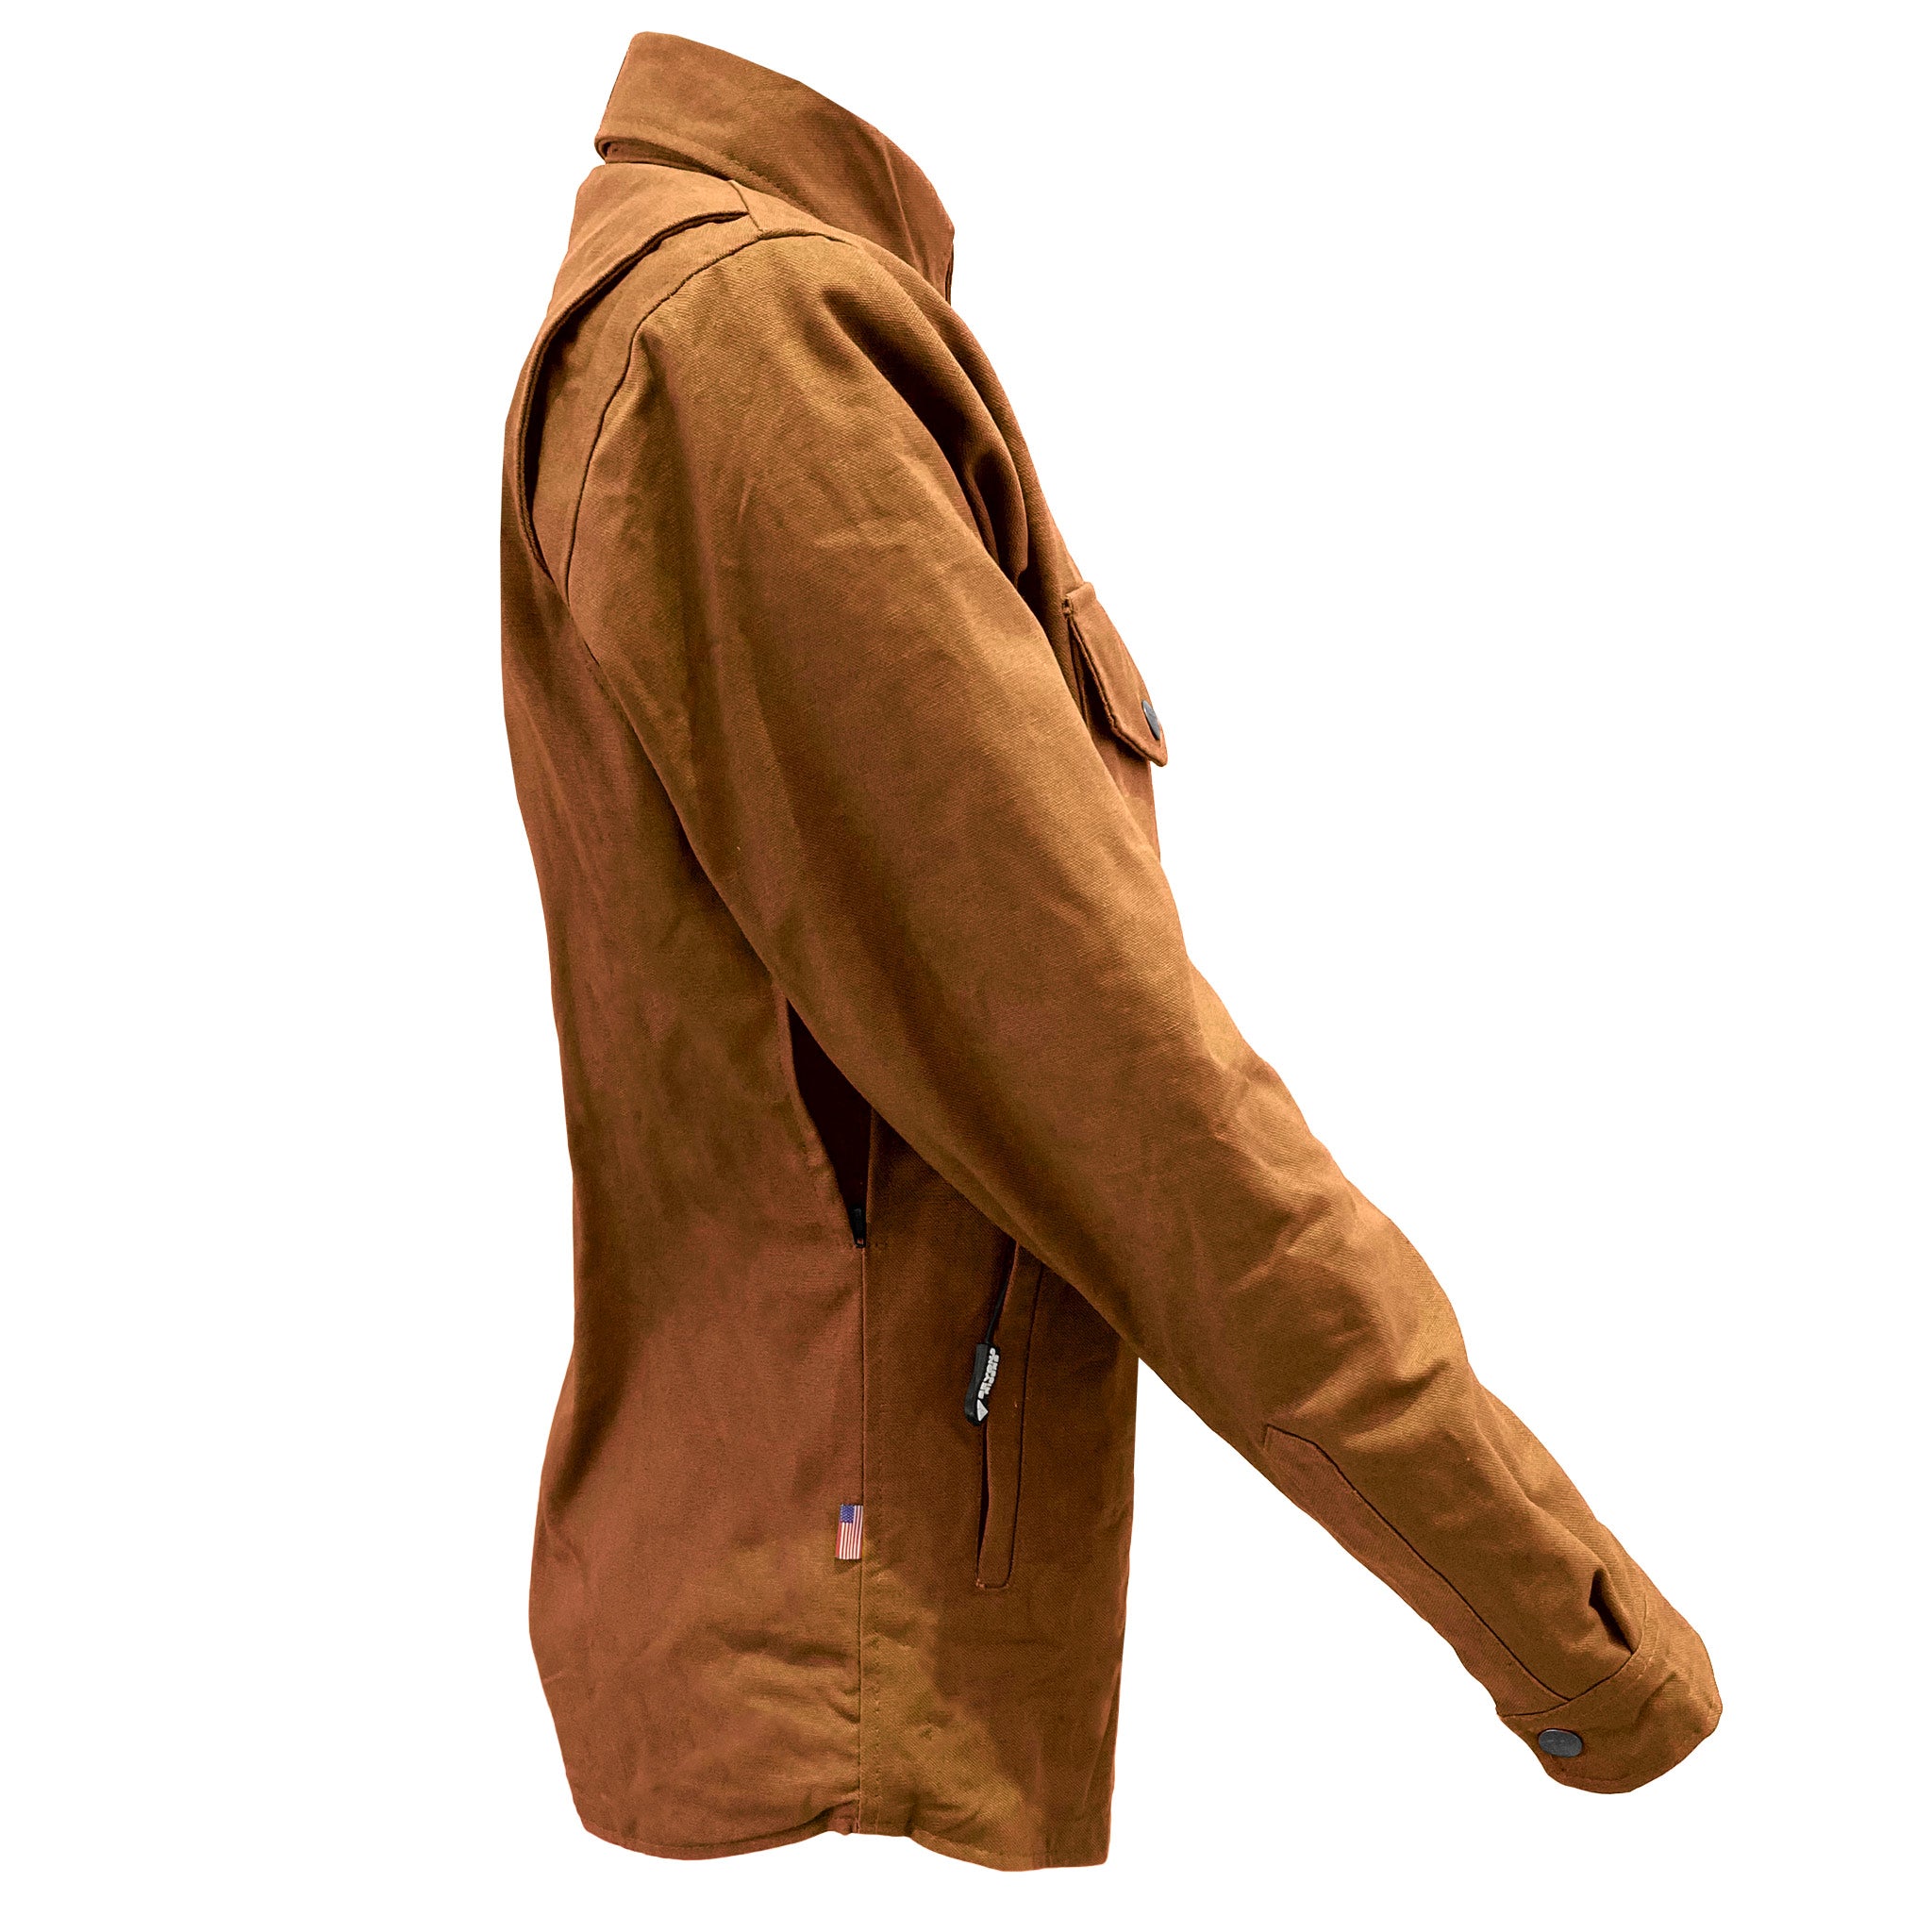 Protective Canvas Jacket for Women - Light Brown